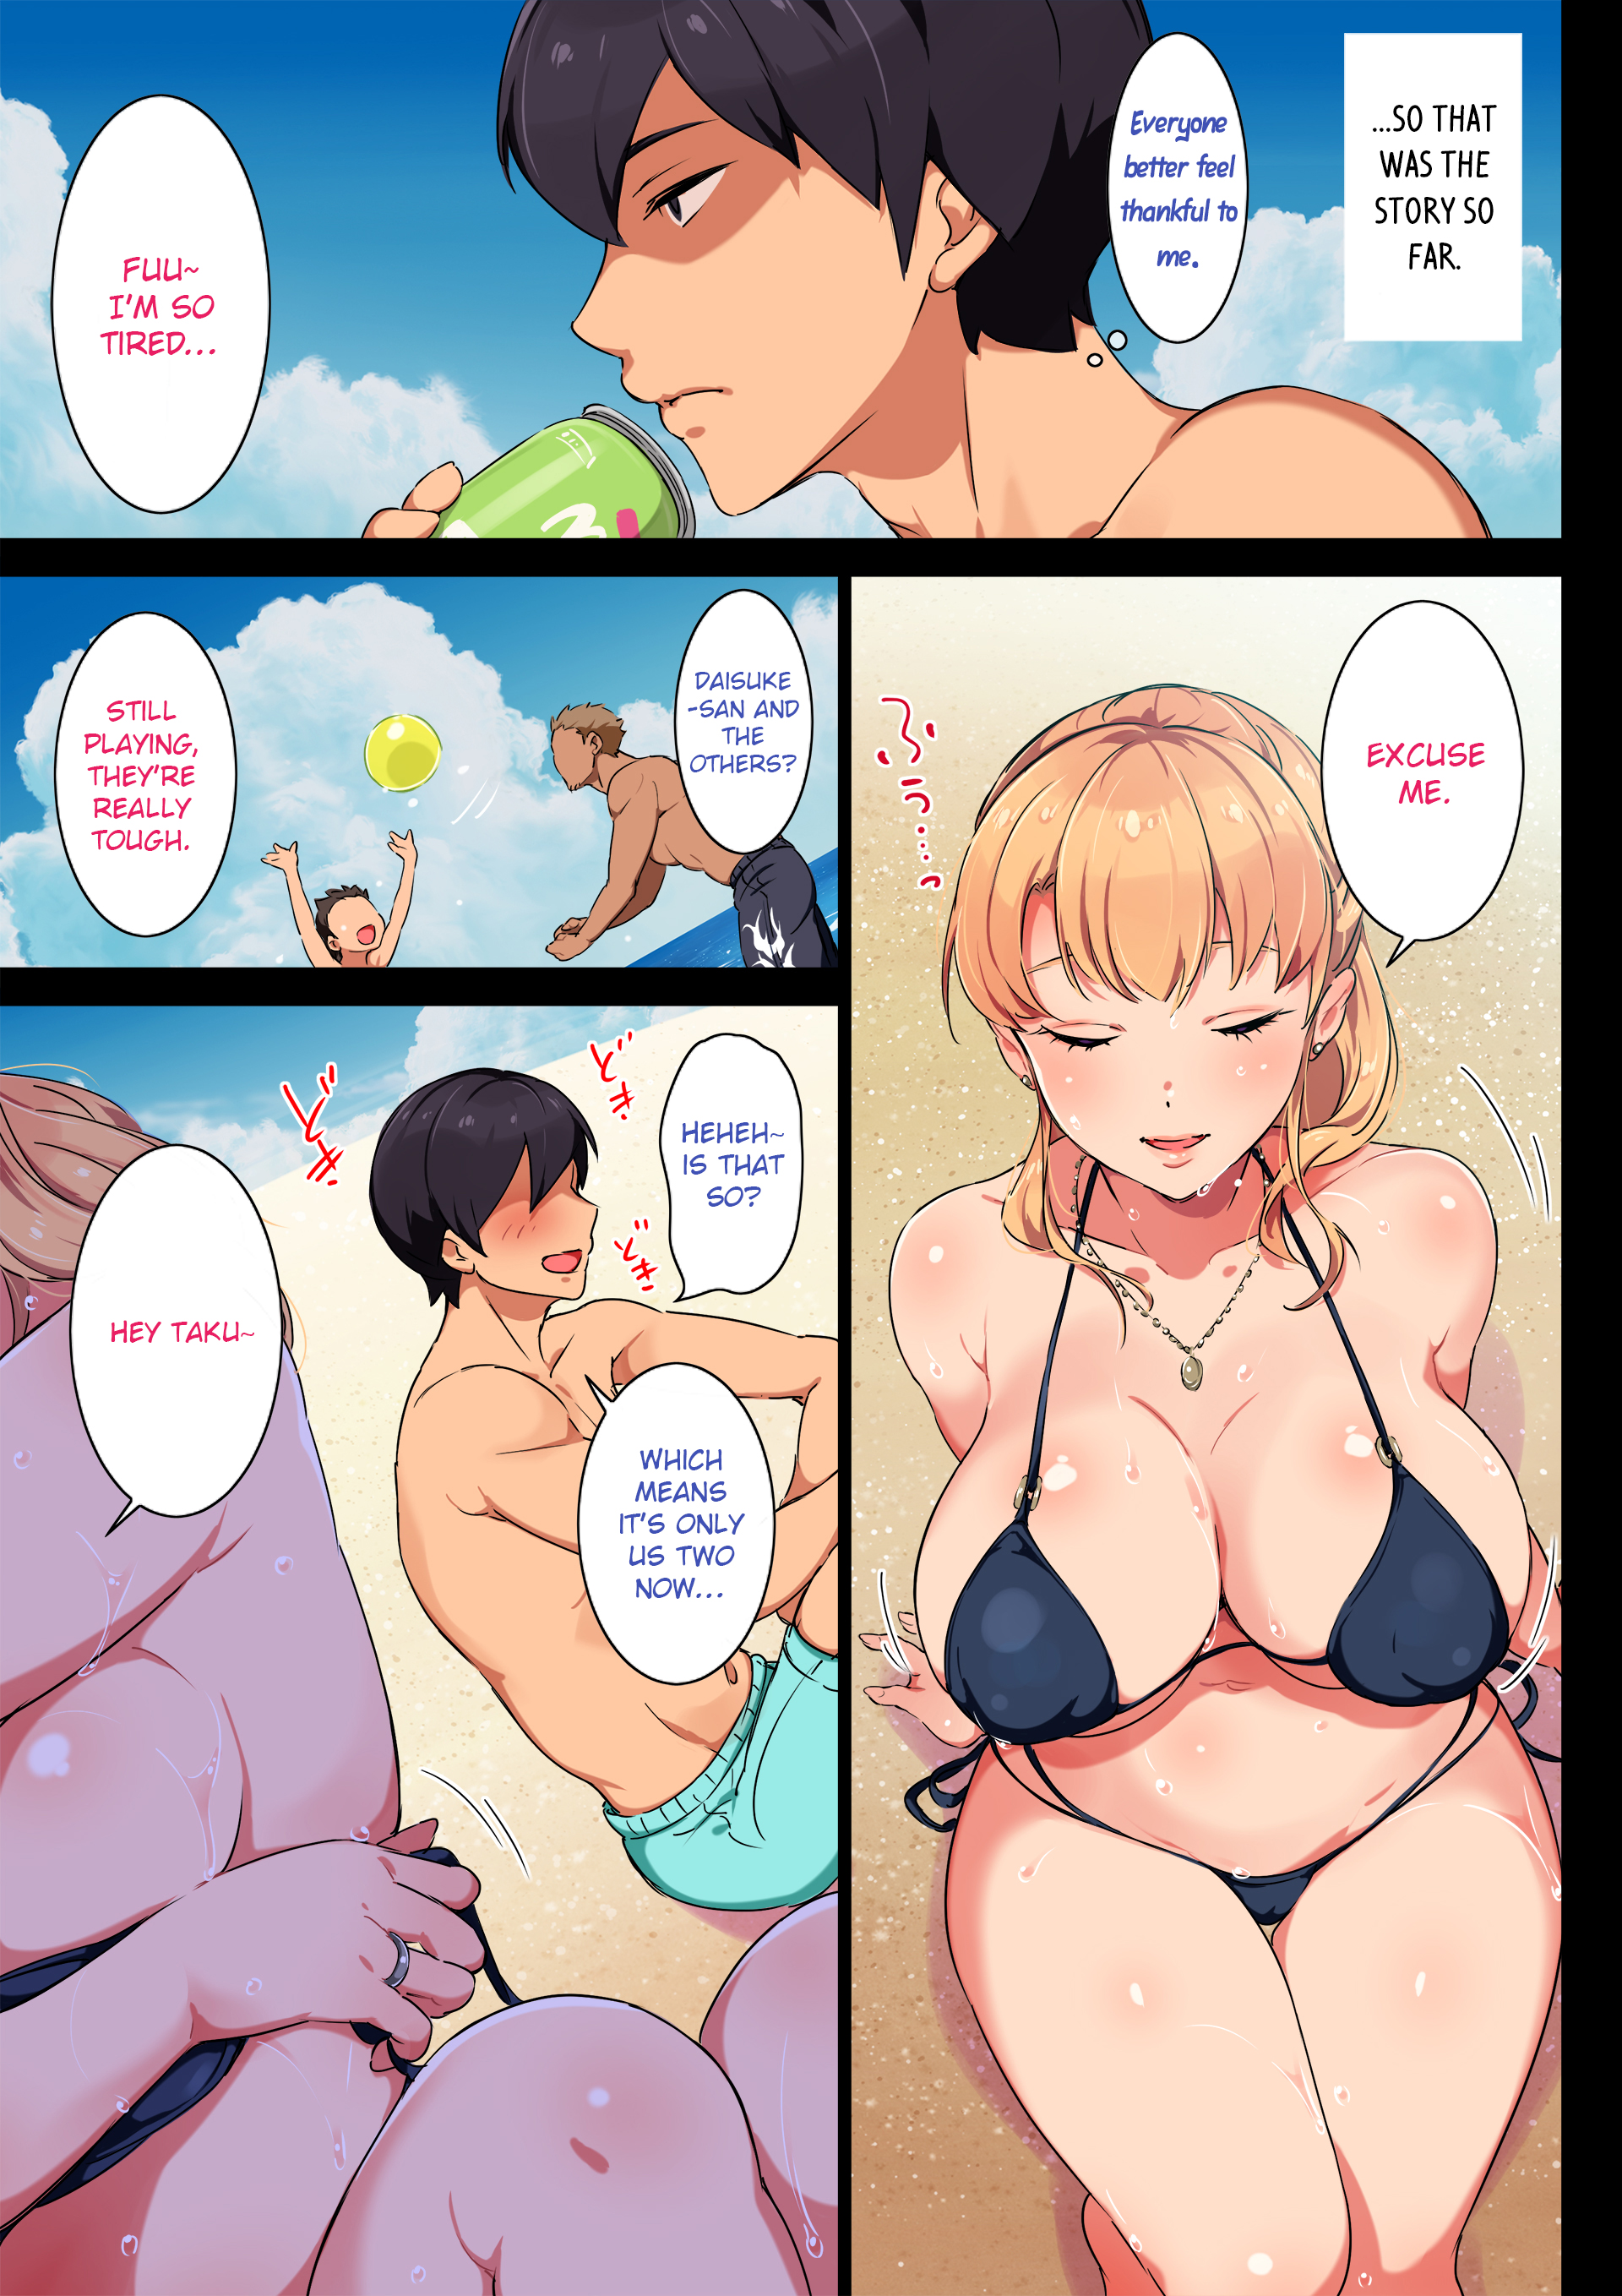 Pervy busty sister fucks her younger brother in the ocean - taboo comics photo